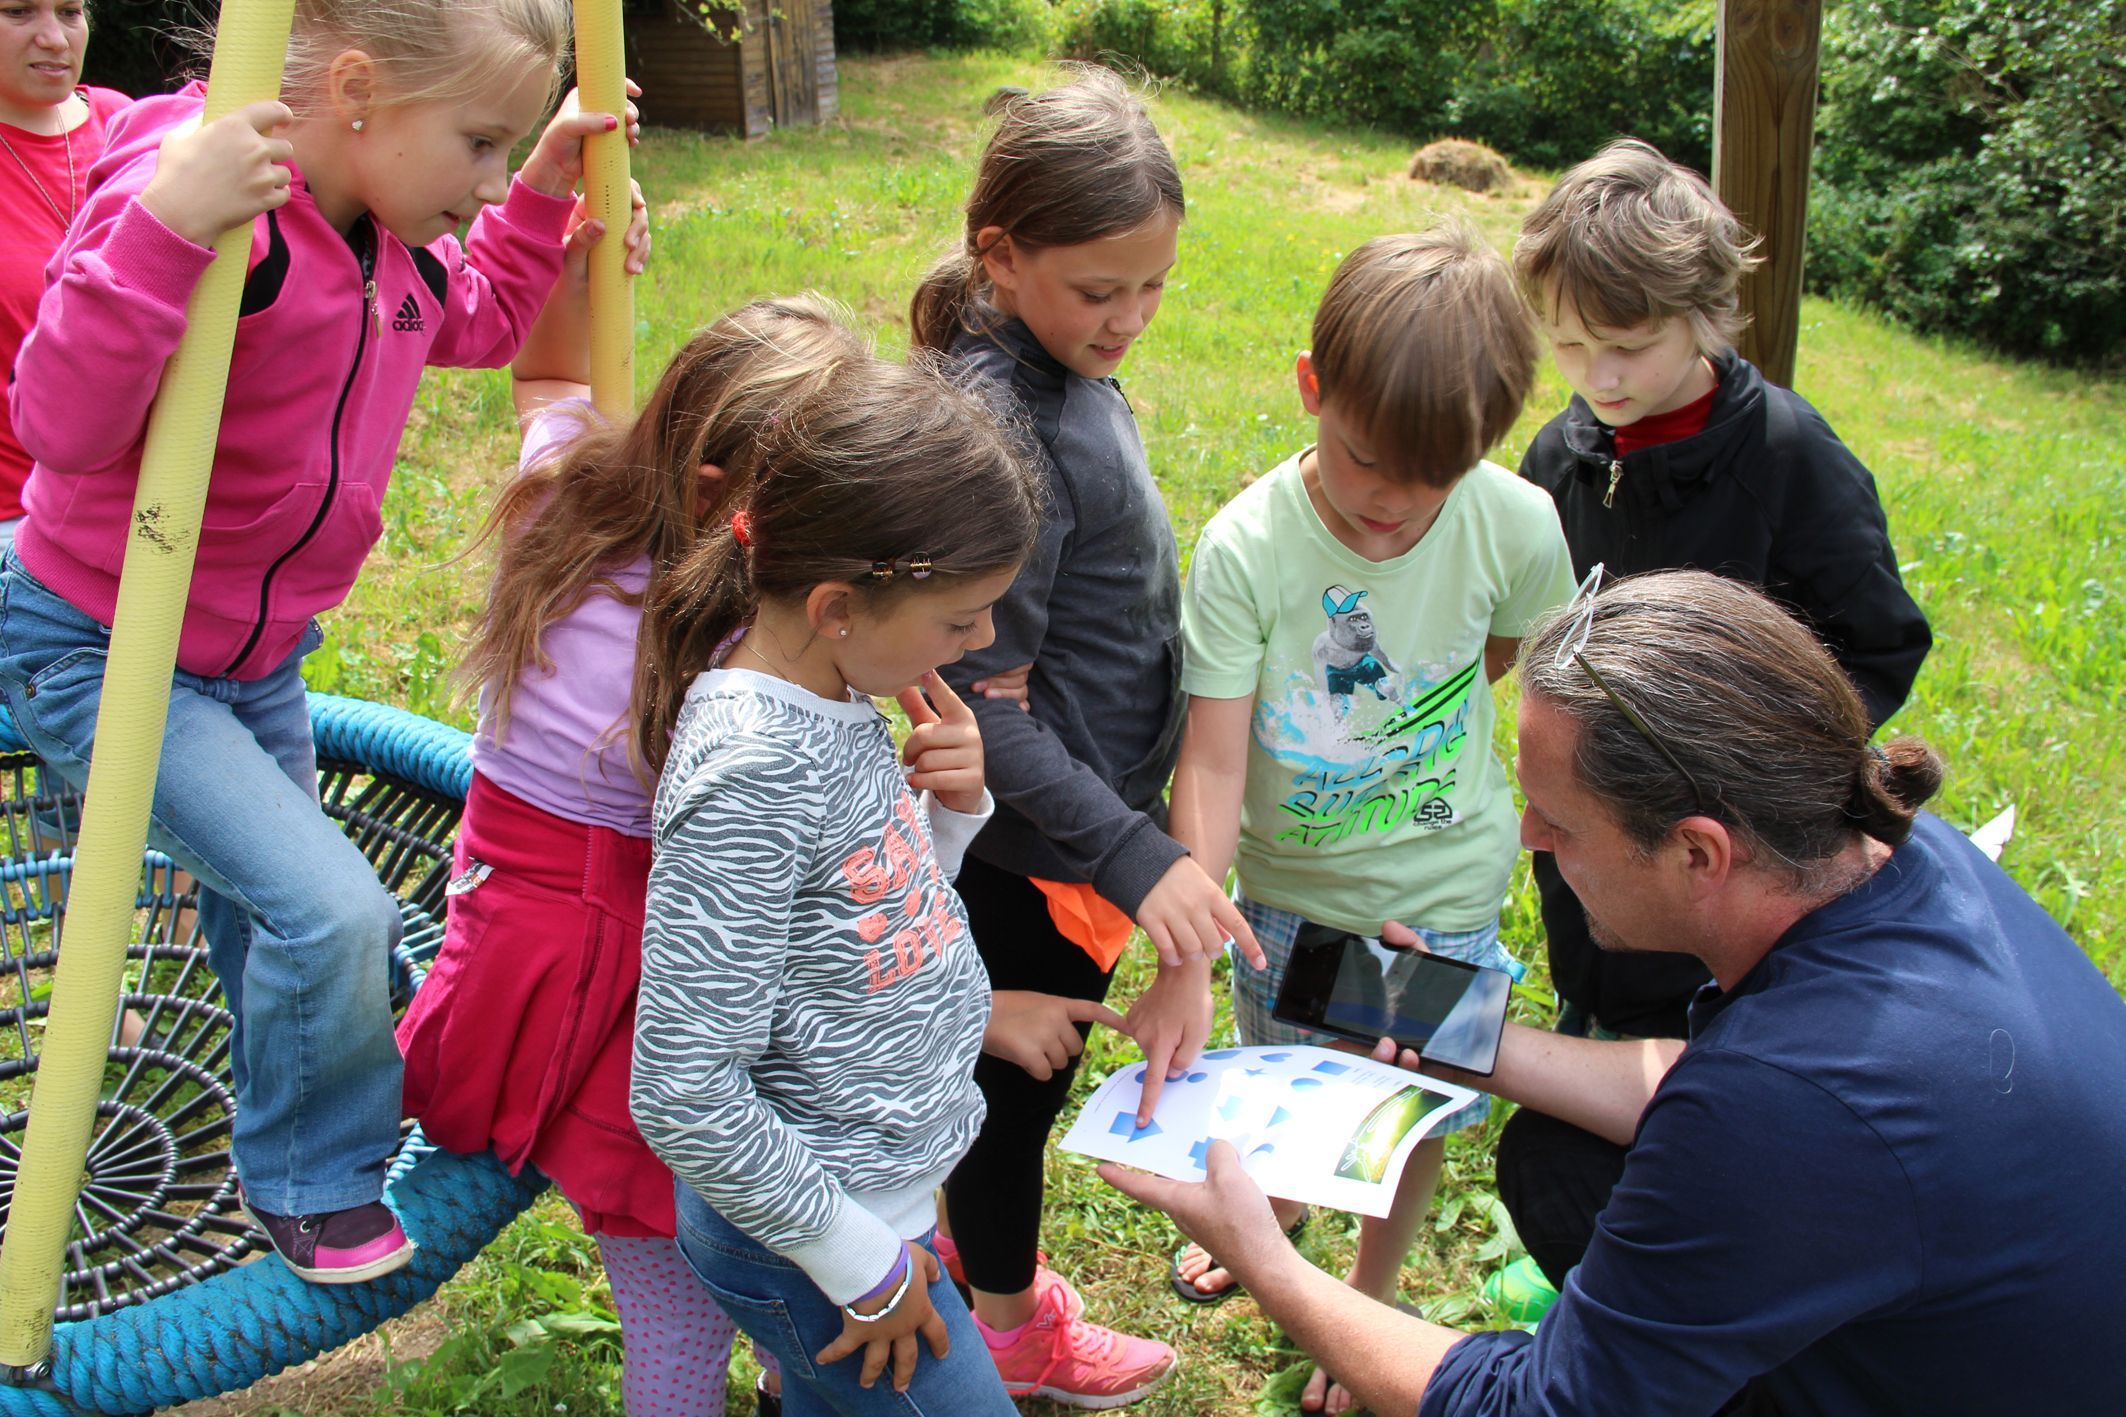 Styrian pupils learn in a playful way how geopositioning works.